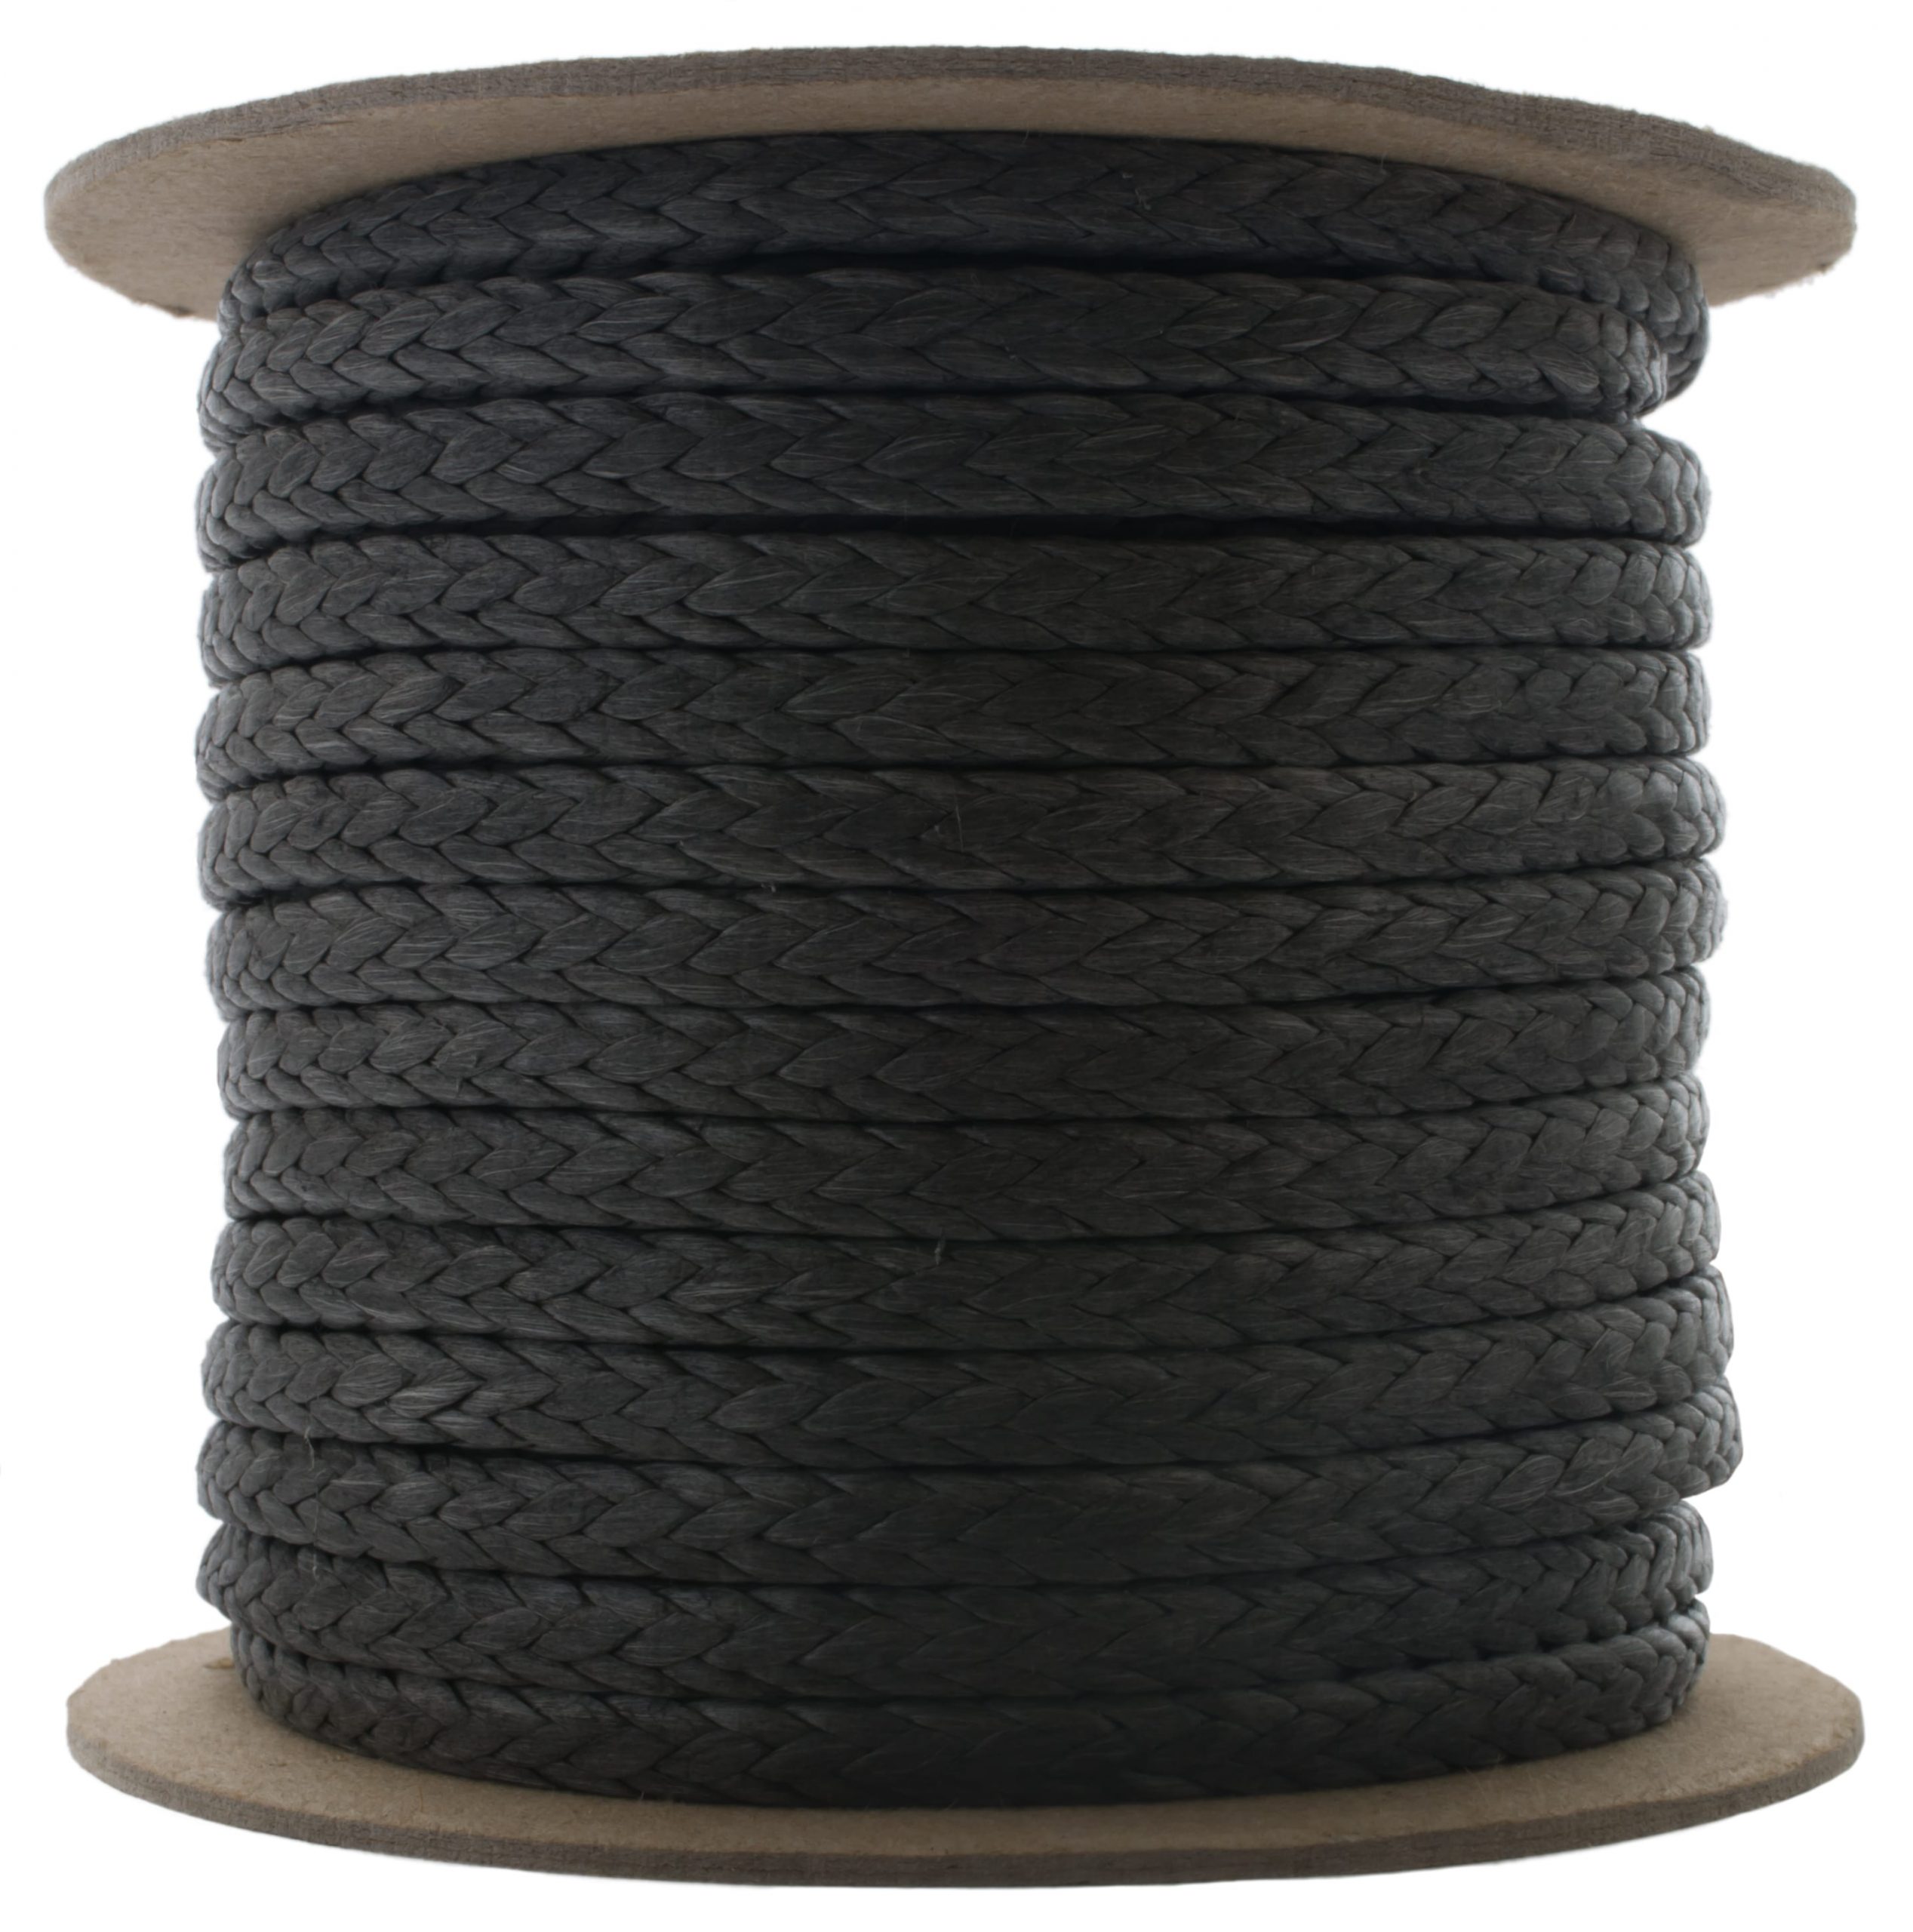 50ft 7700lb 100% UHMWPE Dyneema Cord Cut Resistant Hauling Towing Tactical 